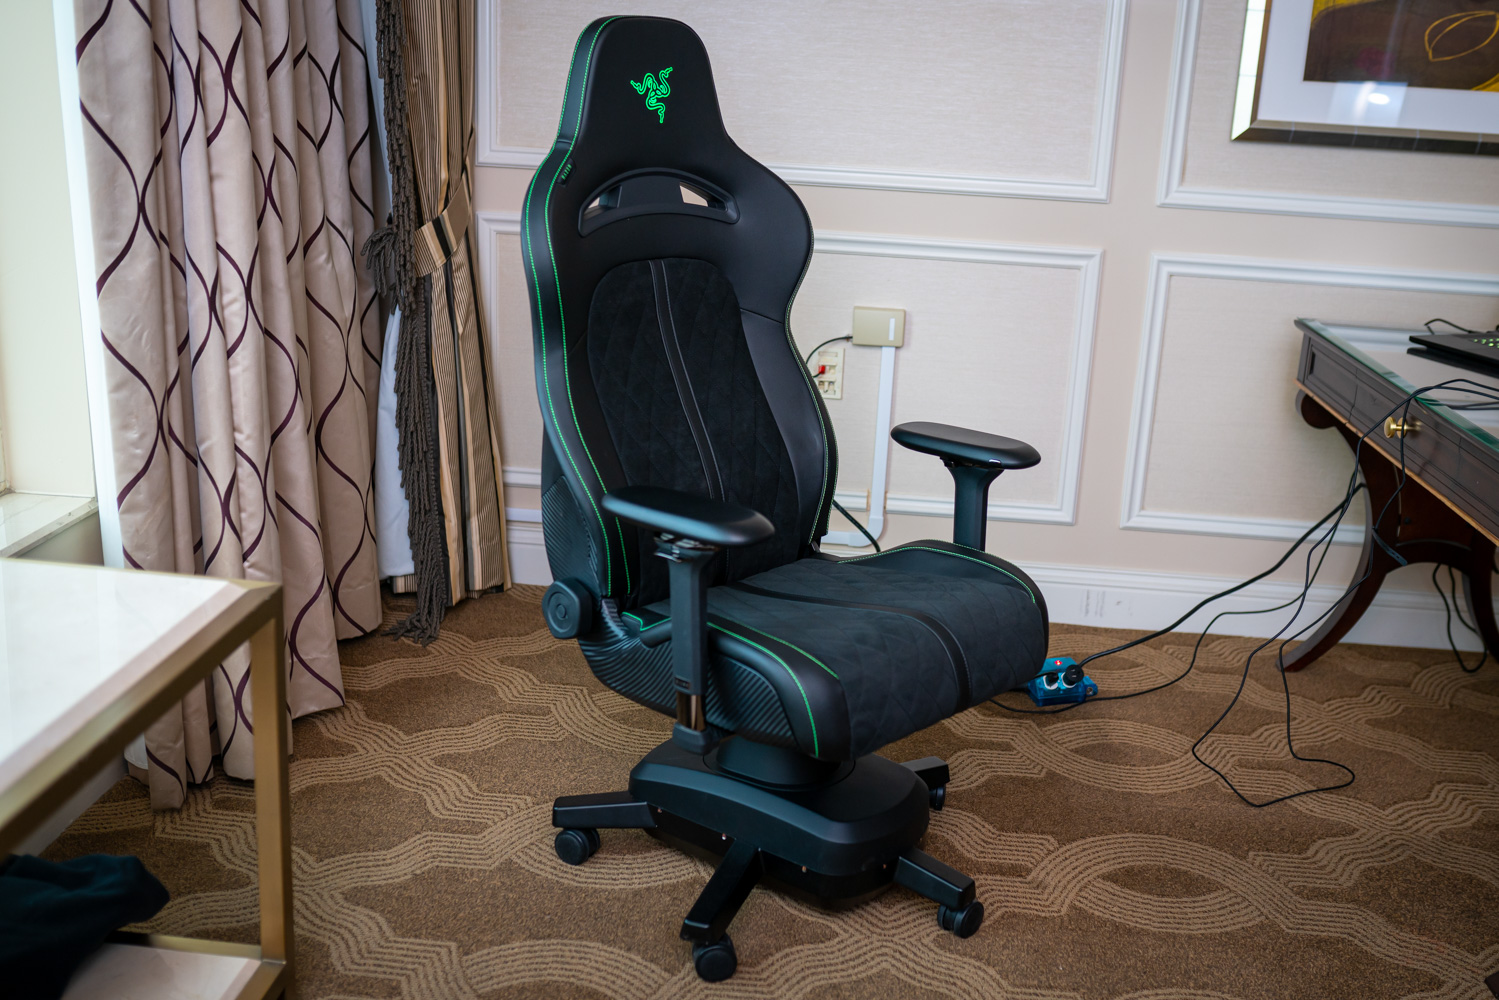 Razer Iskur Gaming Chair Price Announced. Here's Our Review